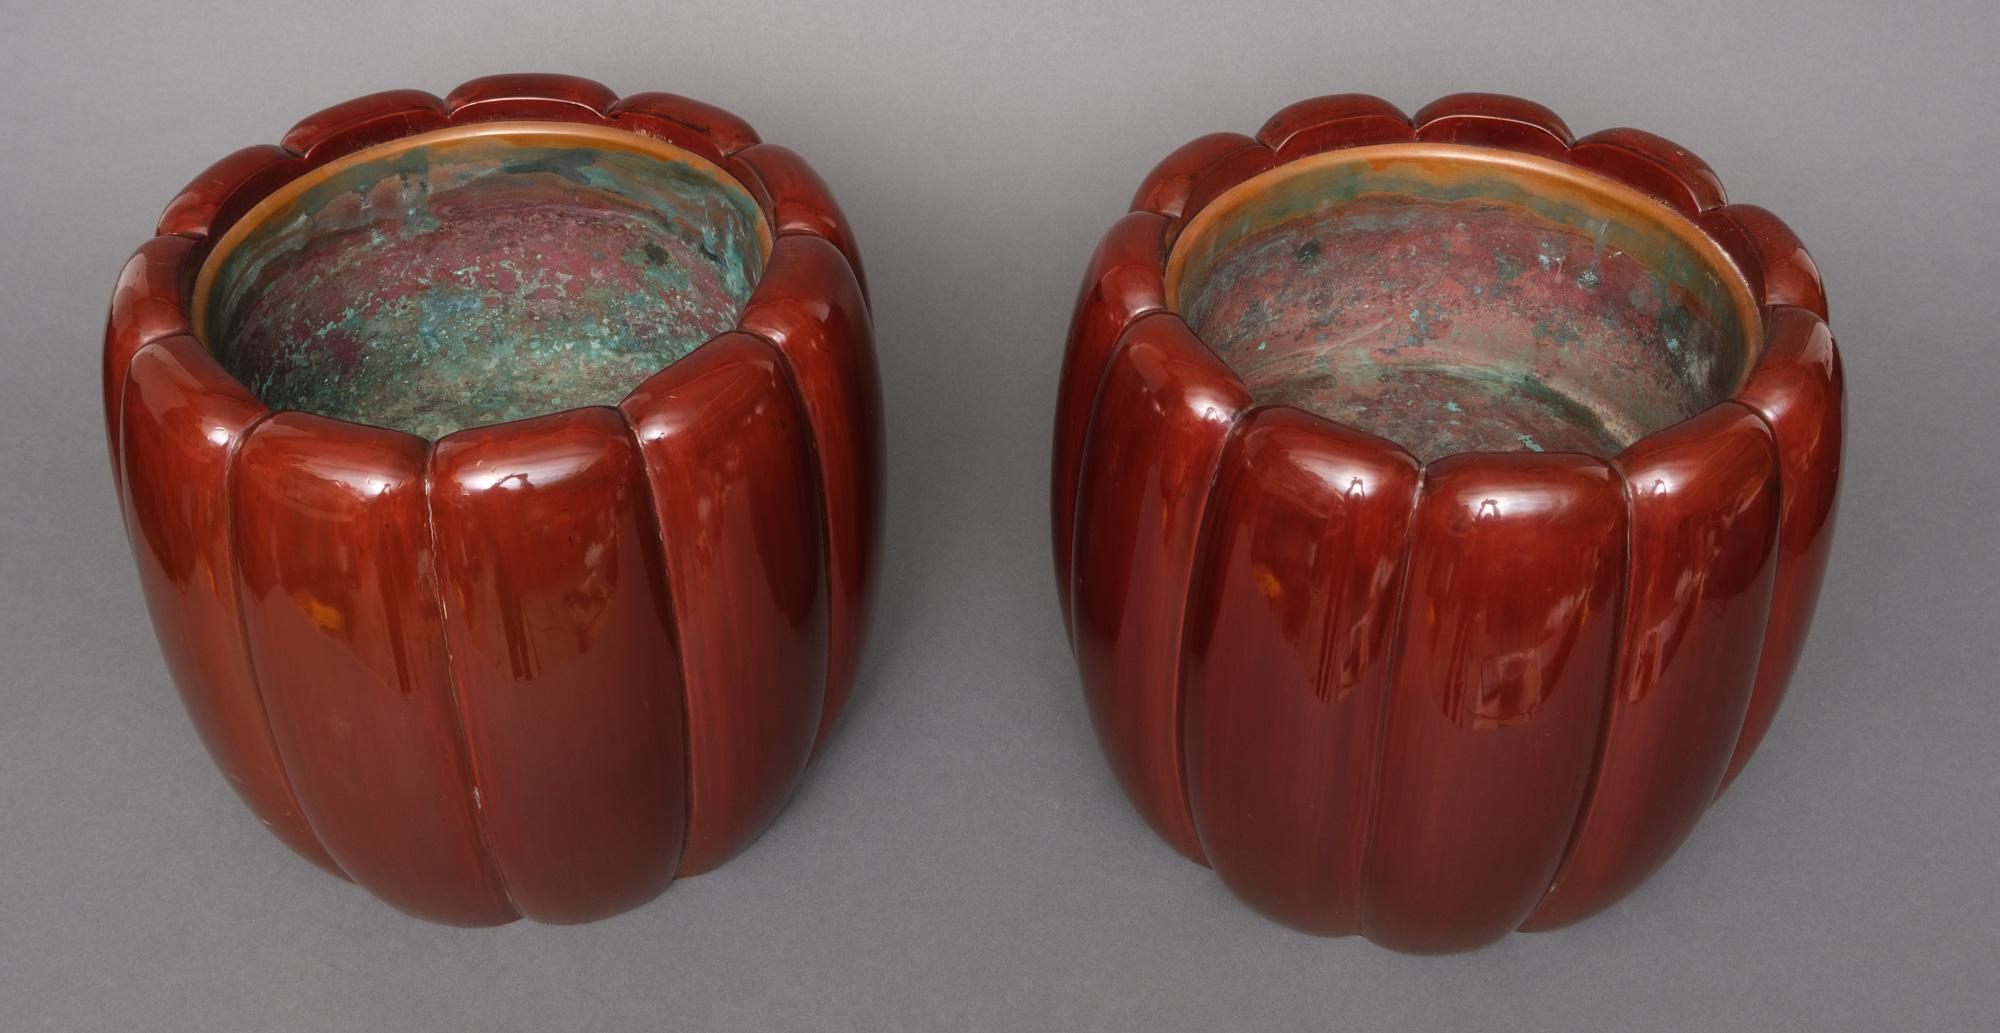 Pair of magnificent hibachi (fire bowls) shaped like chrysanthemum flowers (kiku) and finished with high quality ‘bordeaux red’ lacquer.
Each is carved from a solid piece of wood with fine elegant lobes representing the petals.
The interior fitted